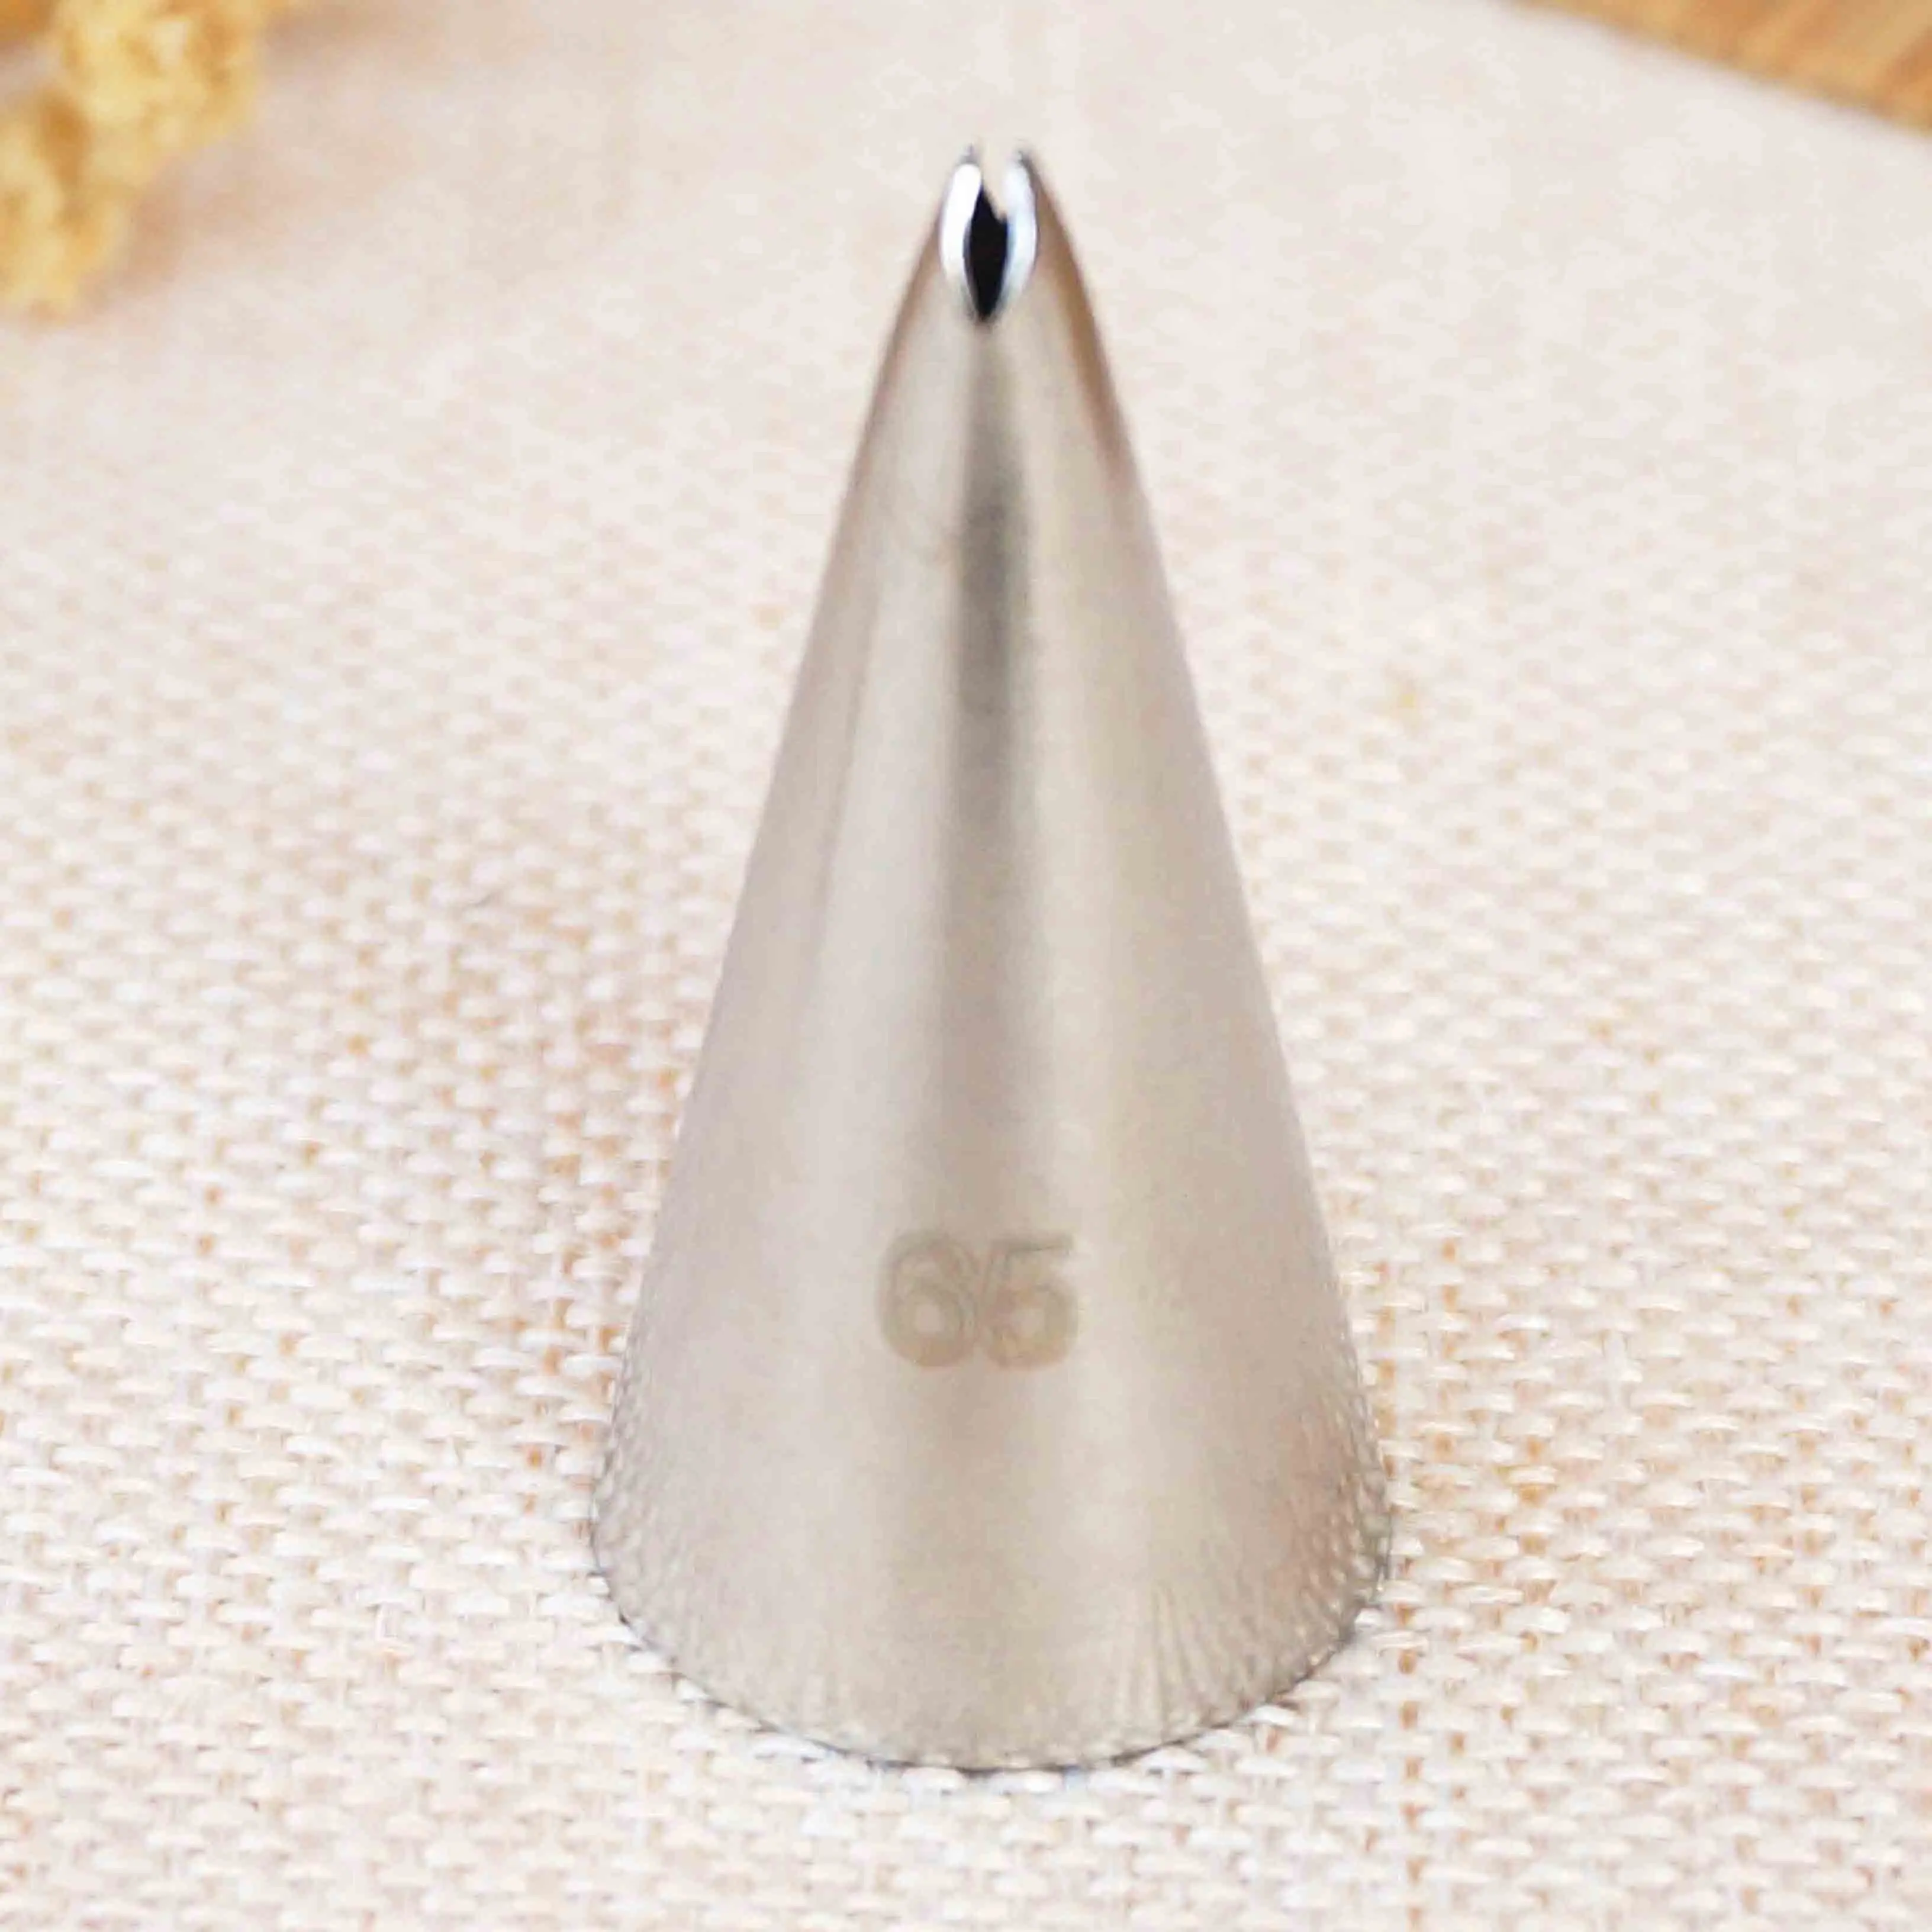 

#65 Small Size Icing Nozzles Piping Tip Pastry Tips Cupcake Tube Decorating Baking Tools Bakeware Creat Leaf Leaves